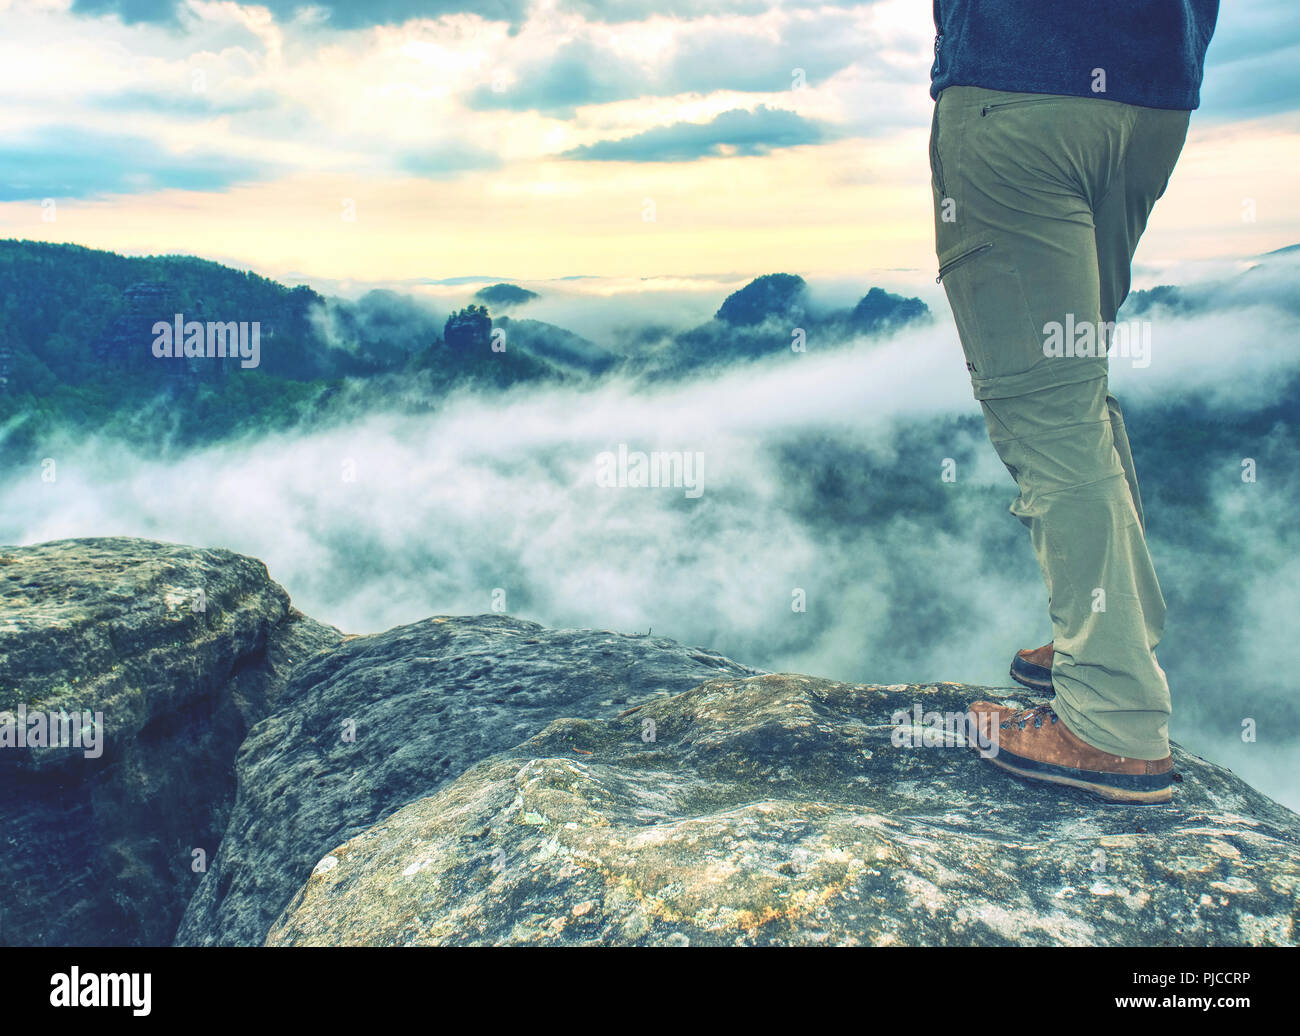 Trekking shoe and legs on rocky hiking trail in mountains motivation inspiration concept. Outdoors achievement, fitness adventure and exercising in wi Stock Photo